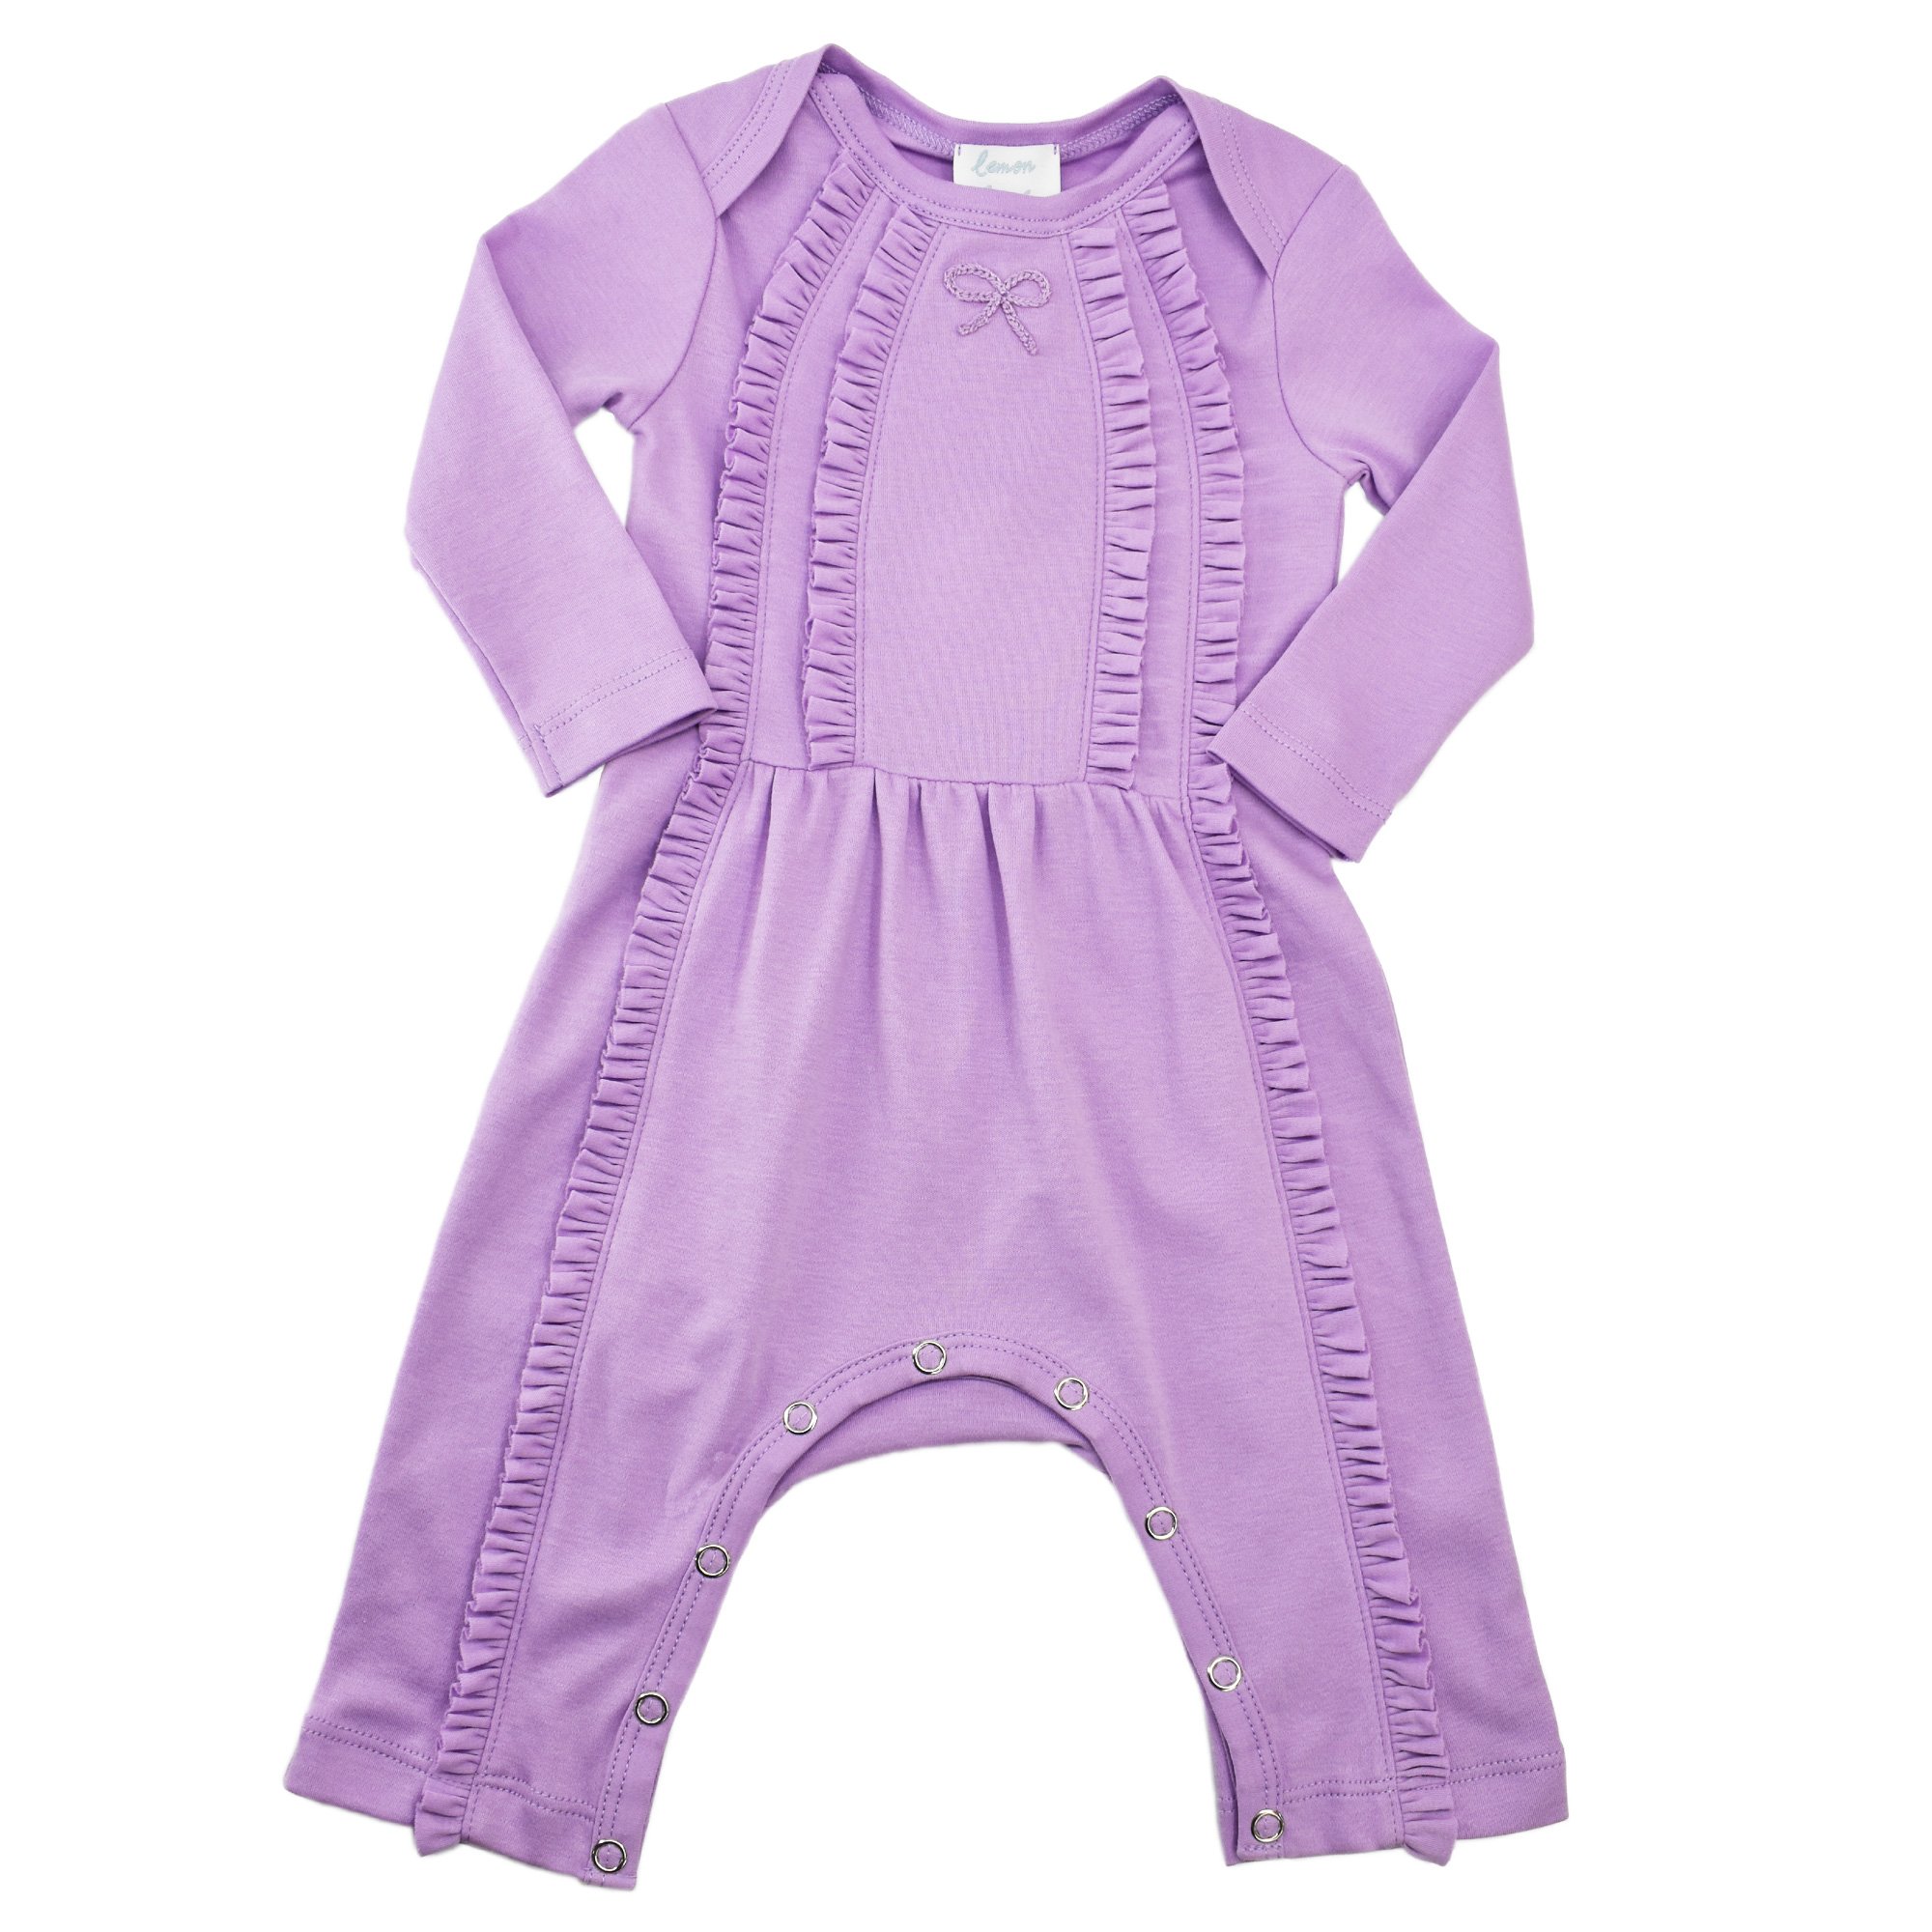 Lemon Loves Layette Victoria Romper for Newborn and Baby Girls in Lilac